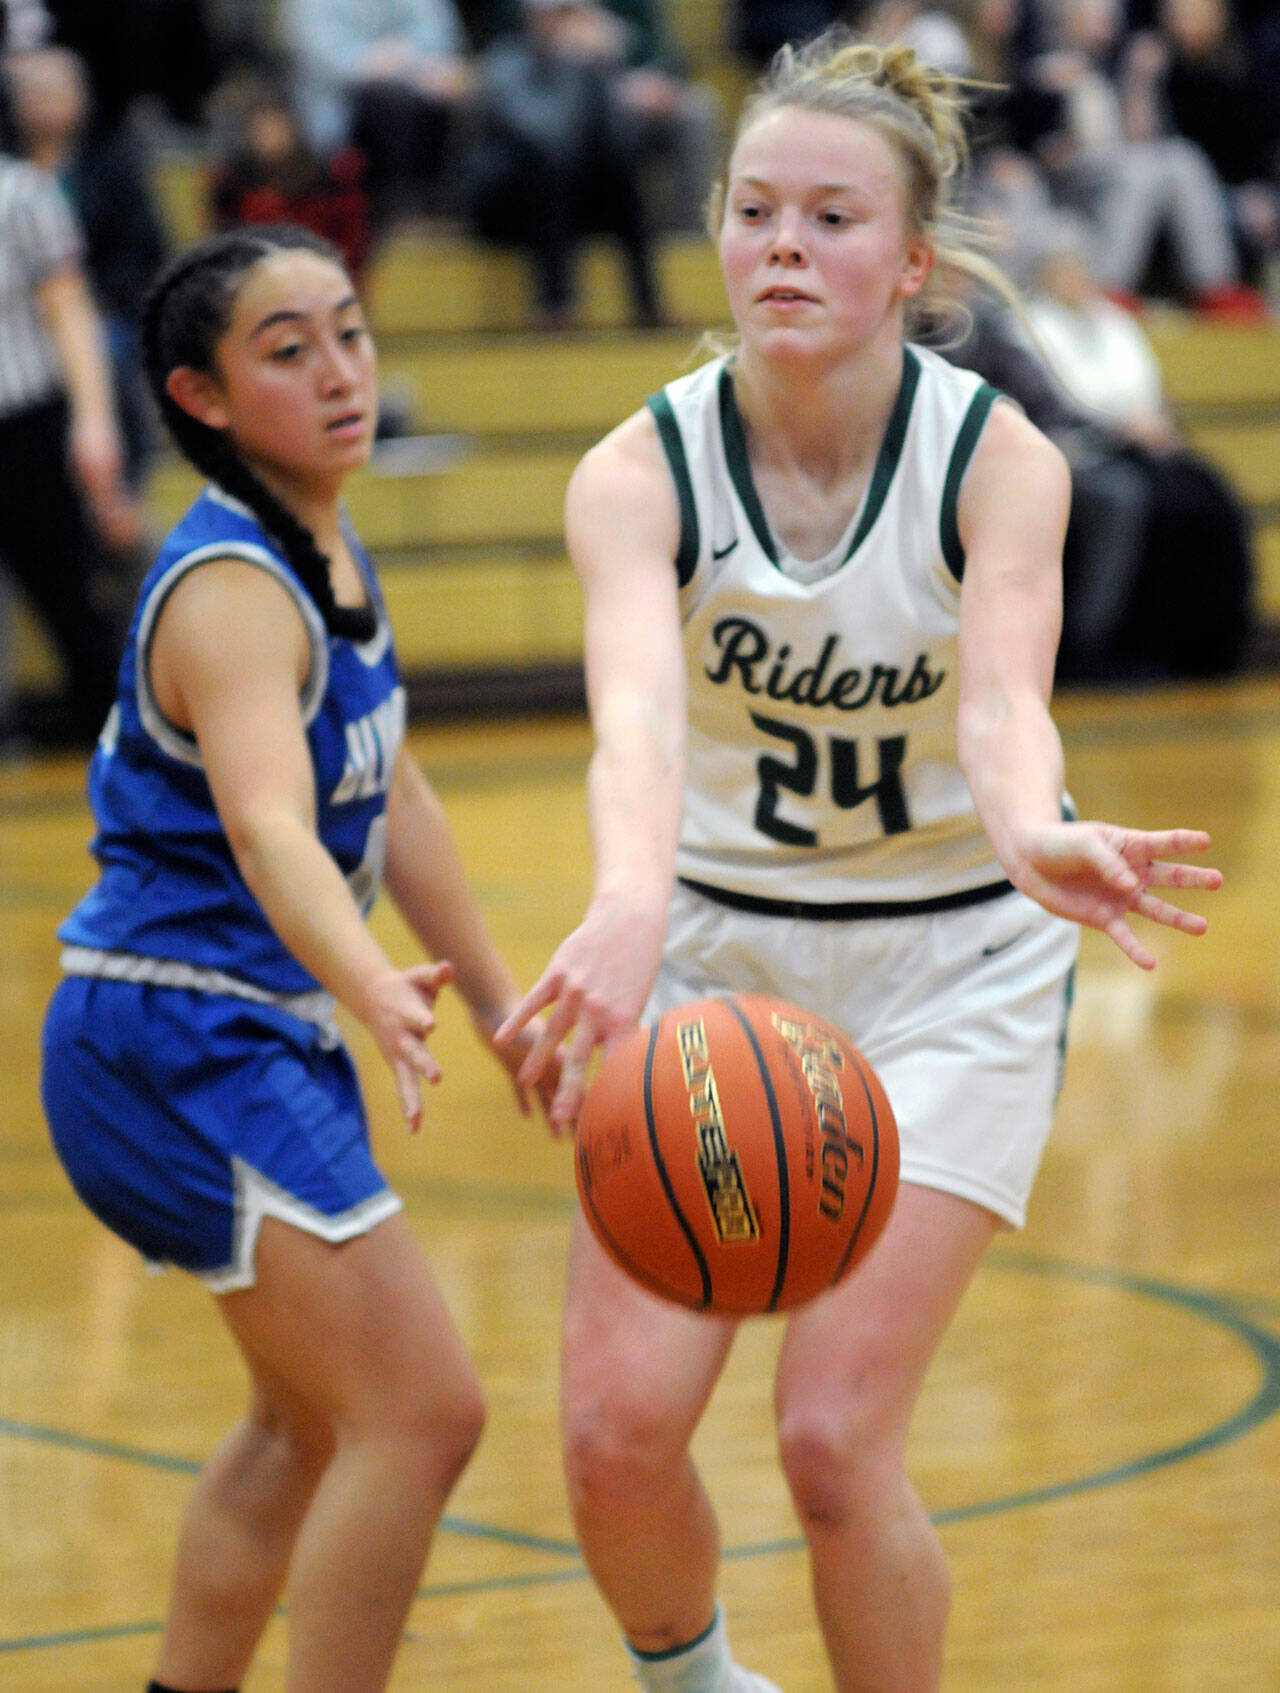 KEITH THORPE/PENINSULA DAILY NEWS Anna Petty of Port Angeles, right, makes a pass as Olympic’s Mailli Bode looks on during Thursday’s game in Port Angeles.